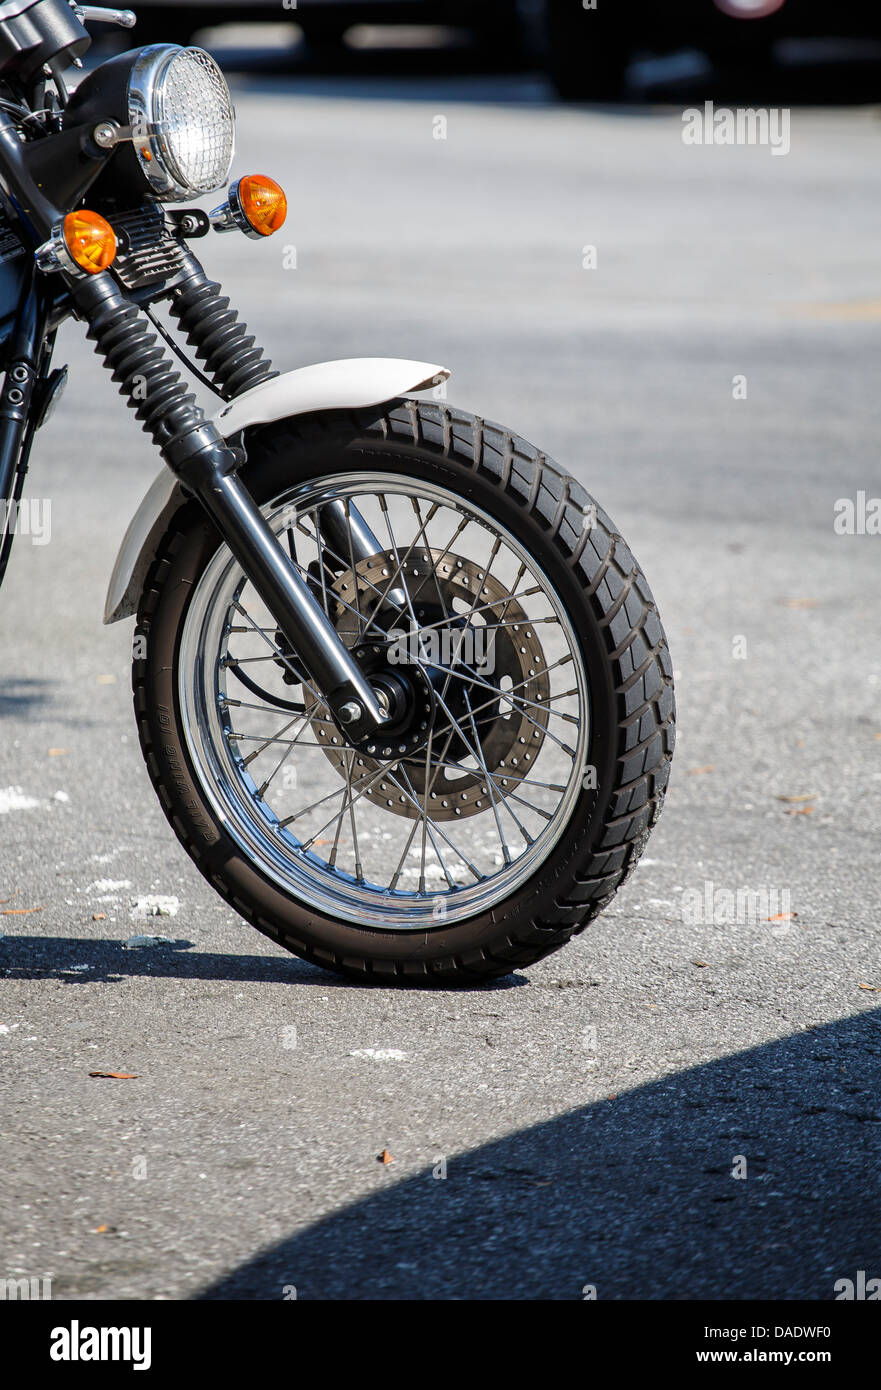 The front wheel of a motorcyle parked in the street showing brakes and spokes Stock Photo